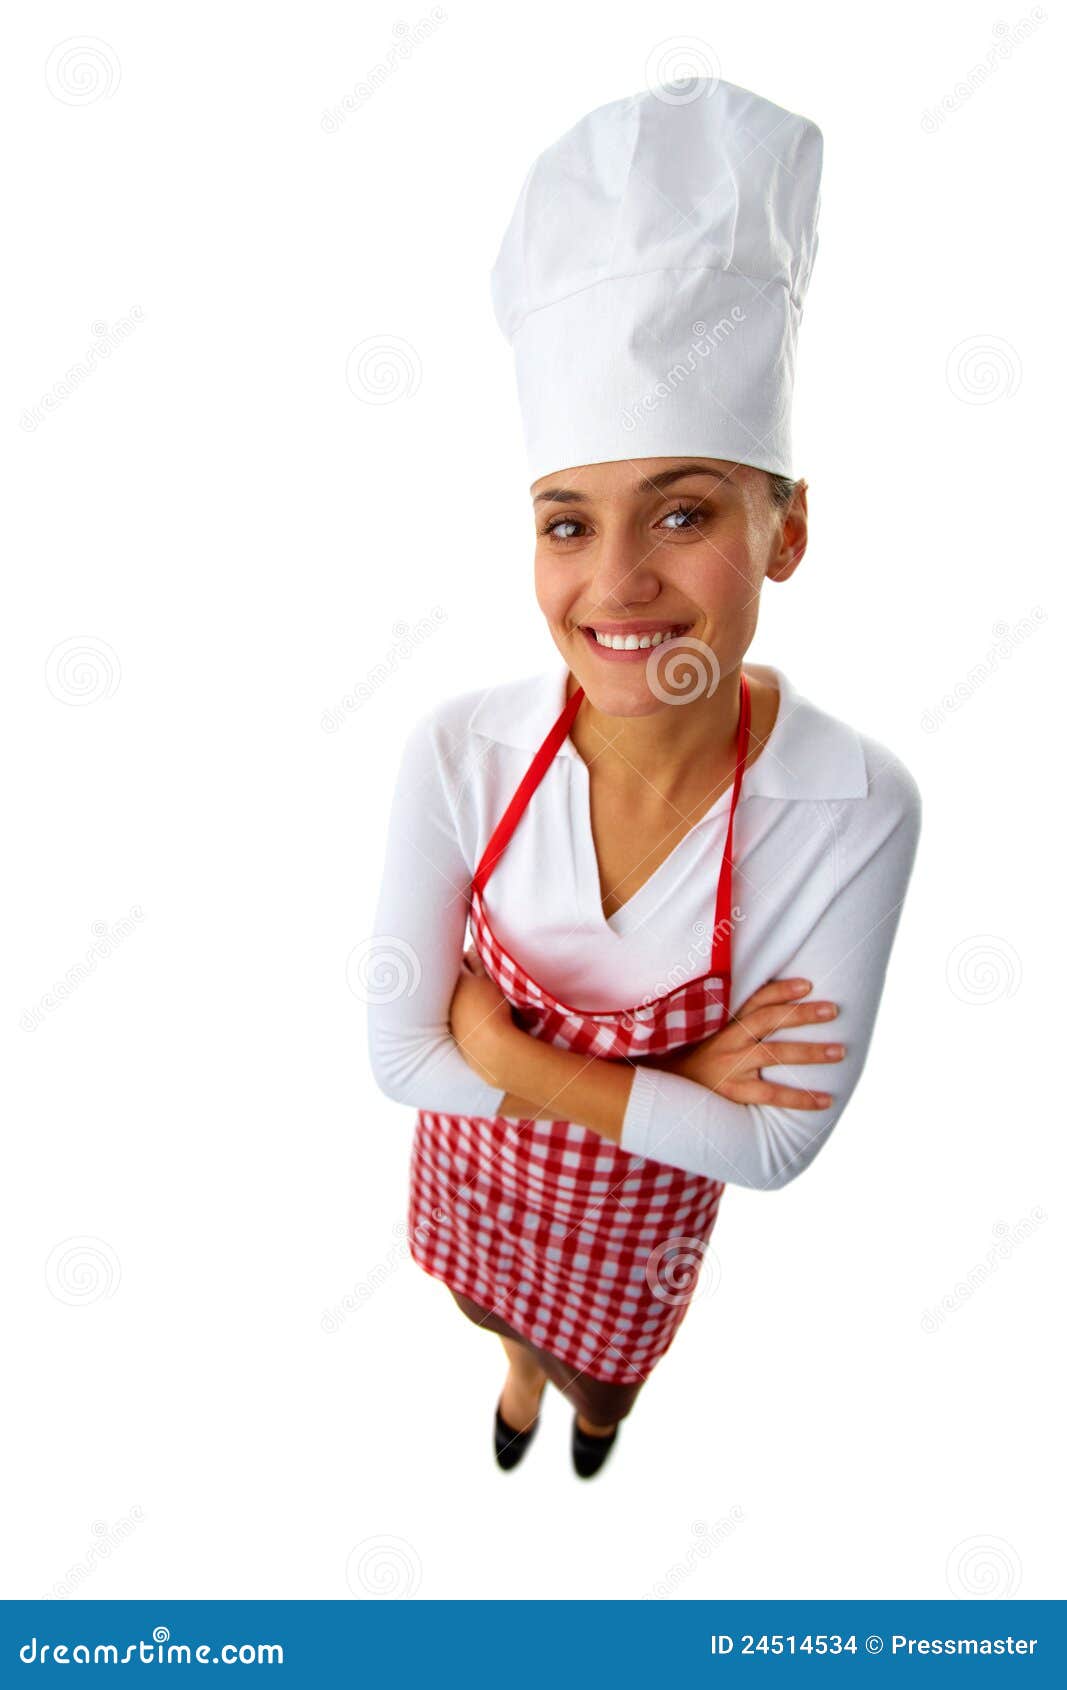 Happy chef stock photo. Image of domestic, cooking, adult - 24514534